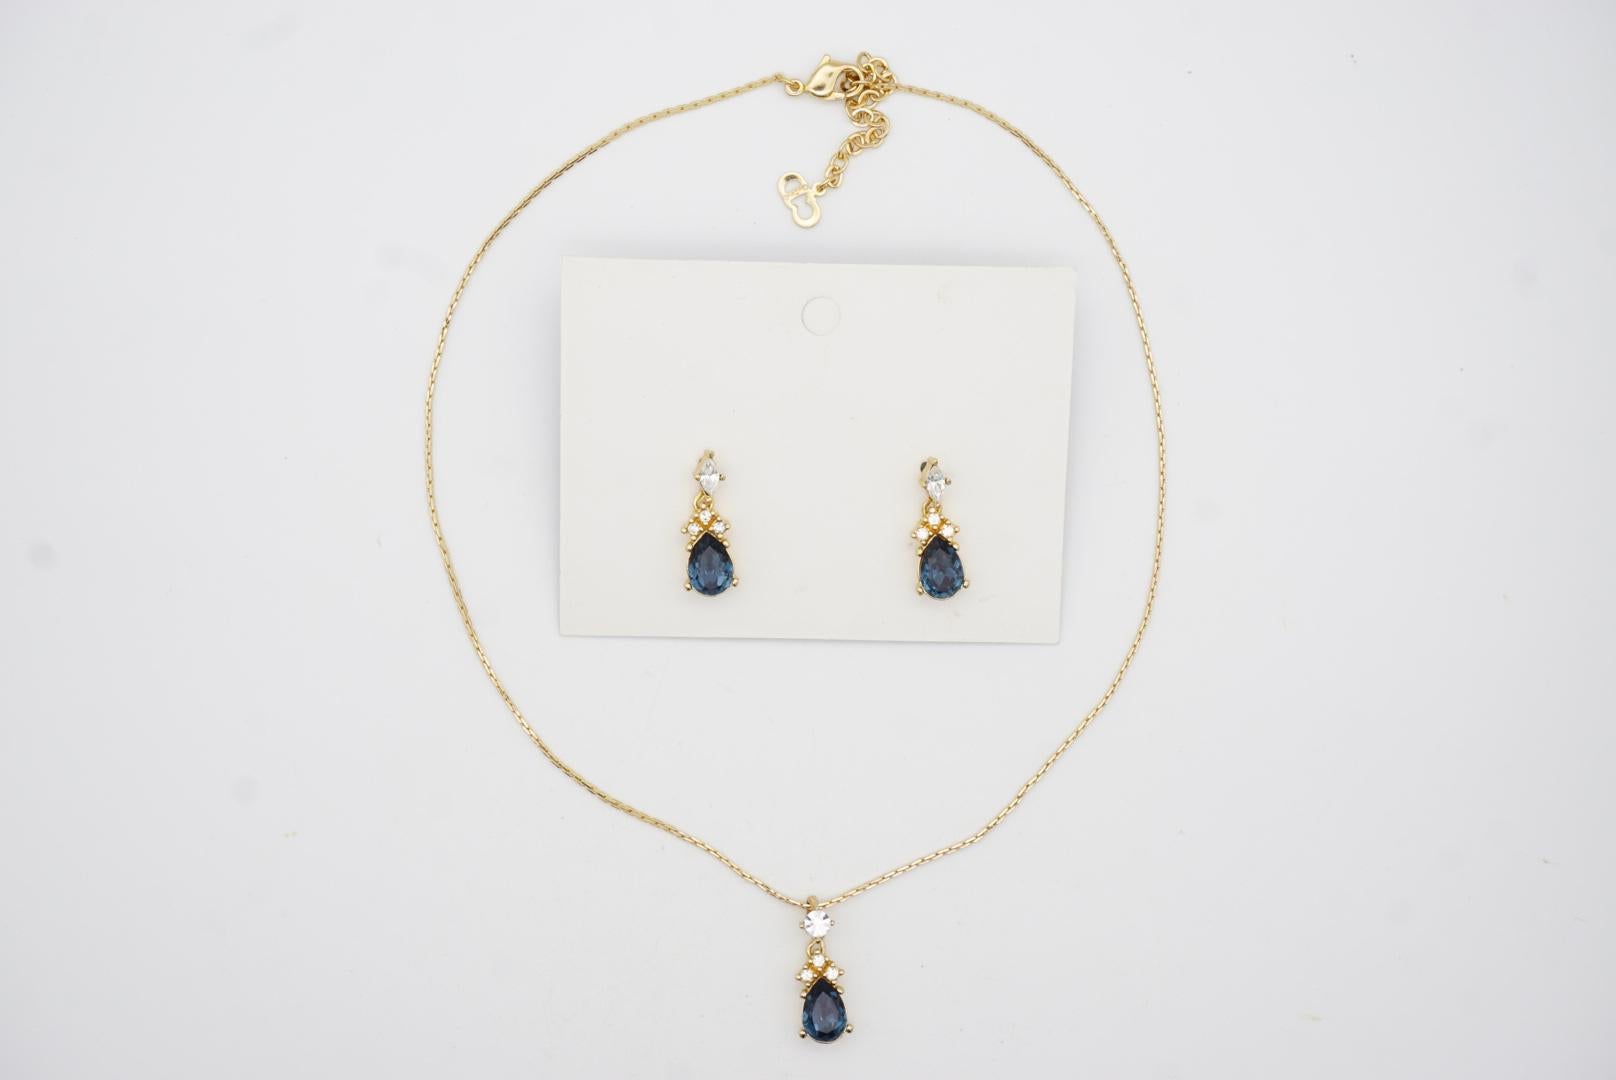 Christian Dior Vintage 1980s Navy Sapphire Crystal Water Drop Jewellery Set Necklace Earrings, Gold Tone

Very excellent condition. Not any scratches or colour loss.

Vintage and rare to find. 100% Genuine. 

Material: Gold plated metal,